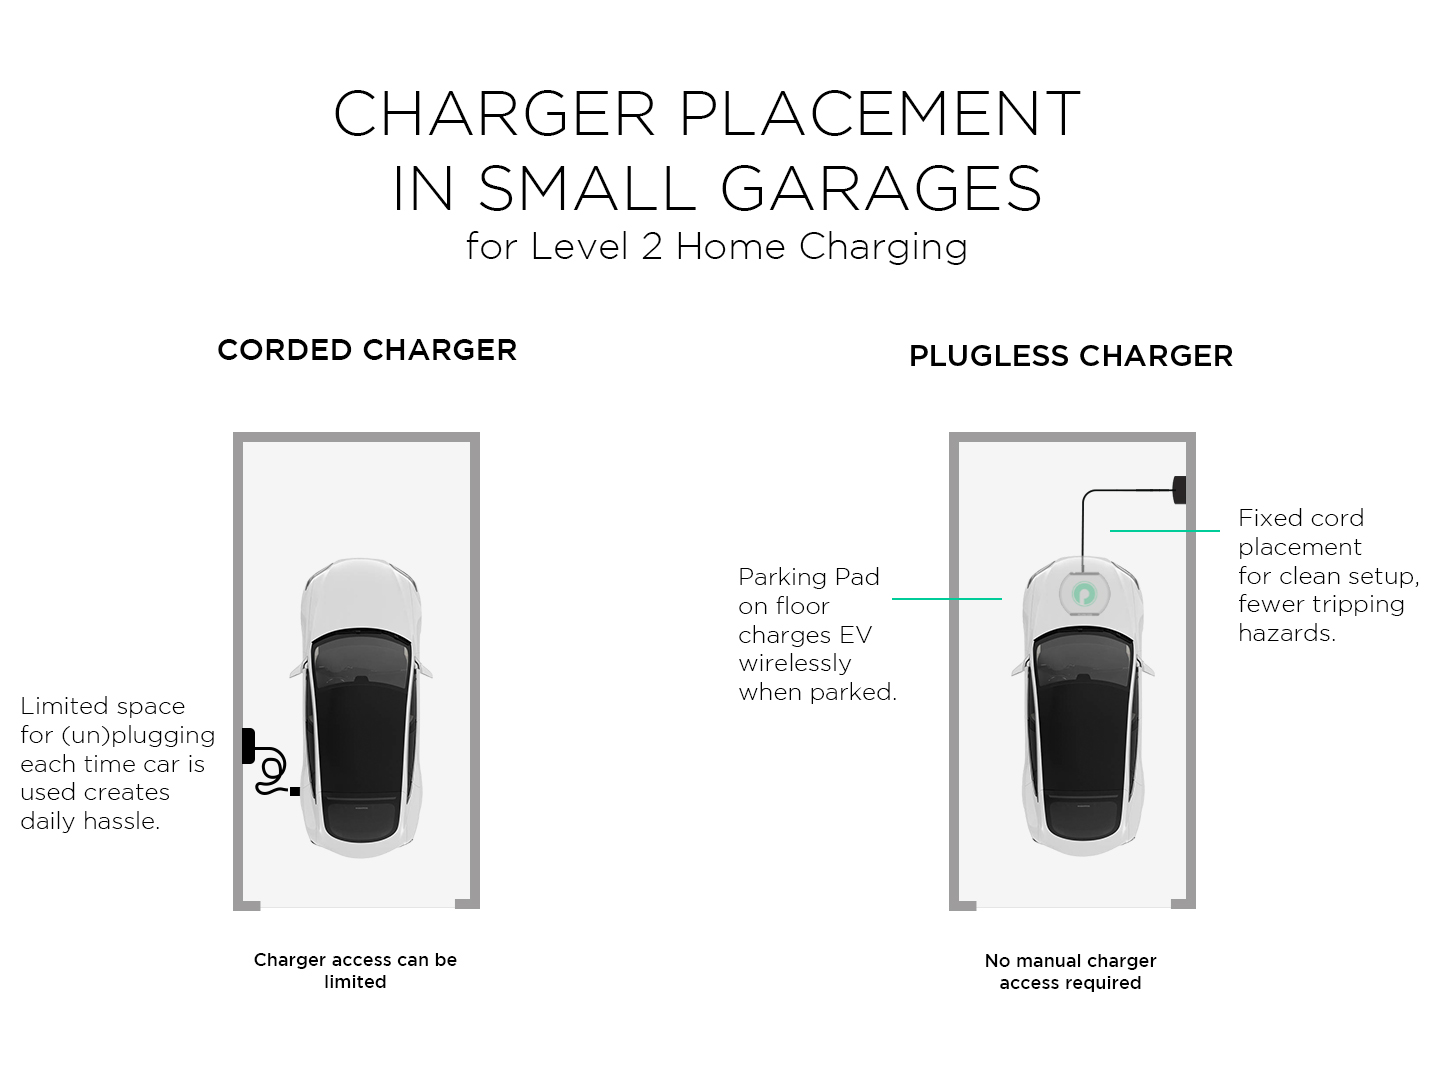 chargerPlacementGraphic - small garage